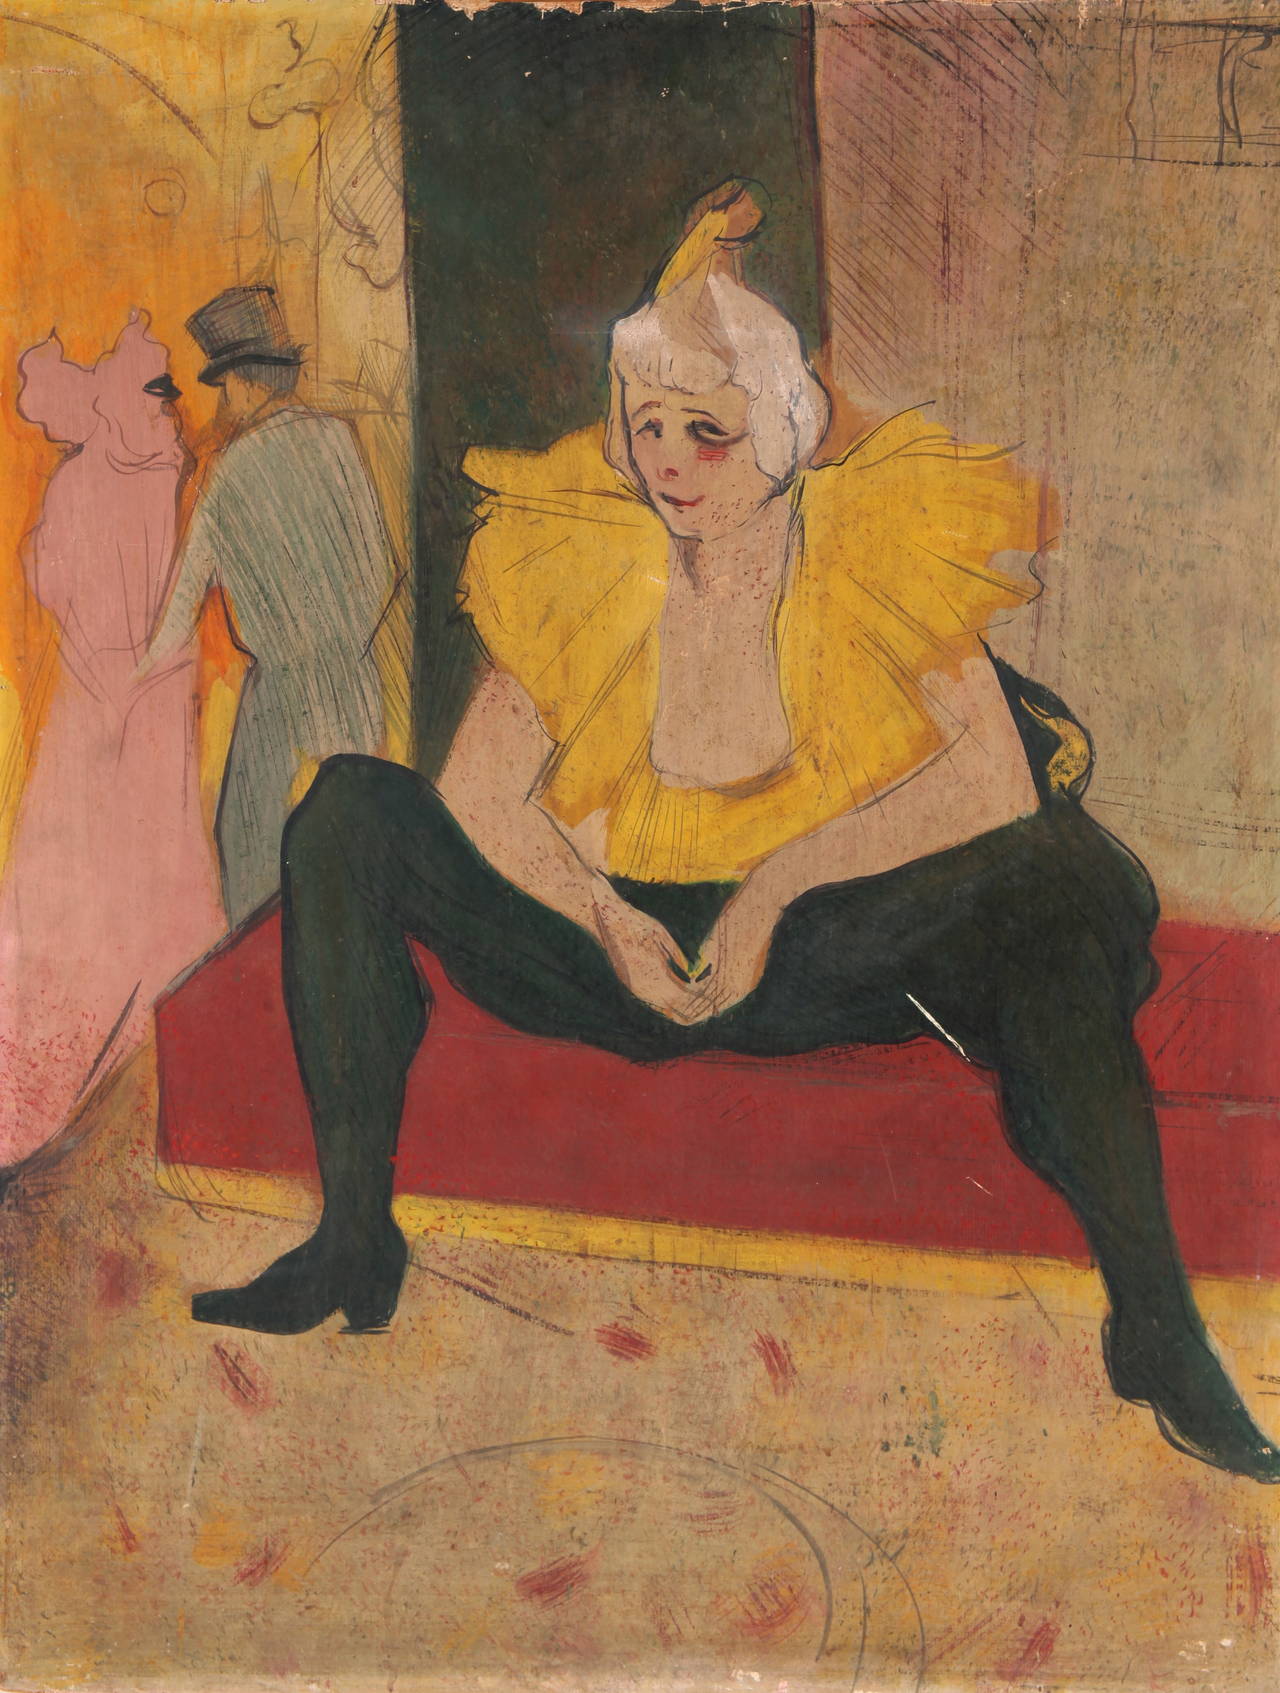 Henri de Toulouse-Lautrec: The Seated Clowness (Mademoiselle Cha-U-Kao) 1896.  Famous French entertainer who performed at the Moulin Rouge in the 1890's. This is the most important painting from the series by Lautrec. Cha-u-Kao soon became one of